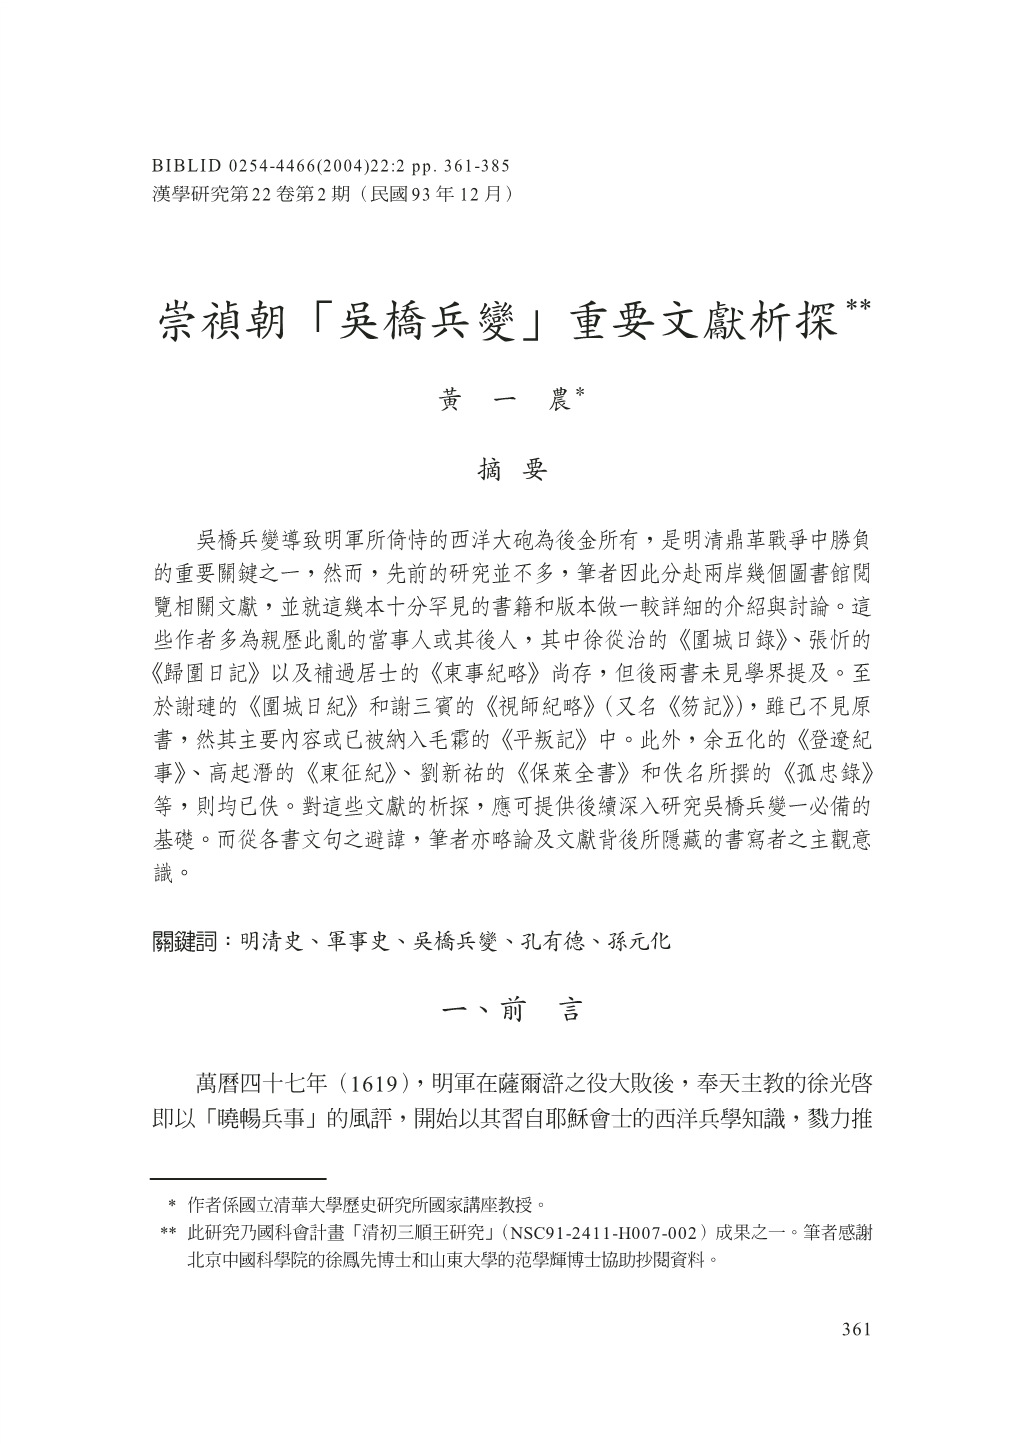 A Study on Ancient Accounts of the Wuqiao Mutiny of 1632-1633